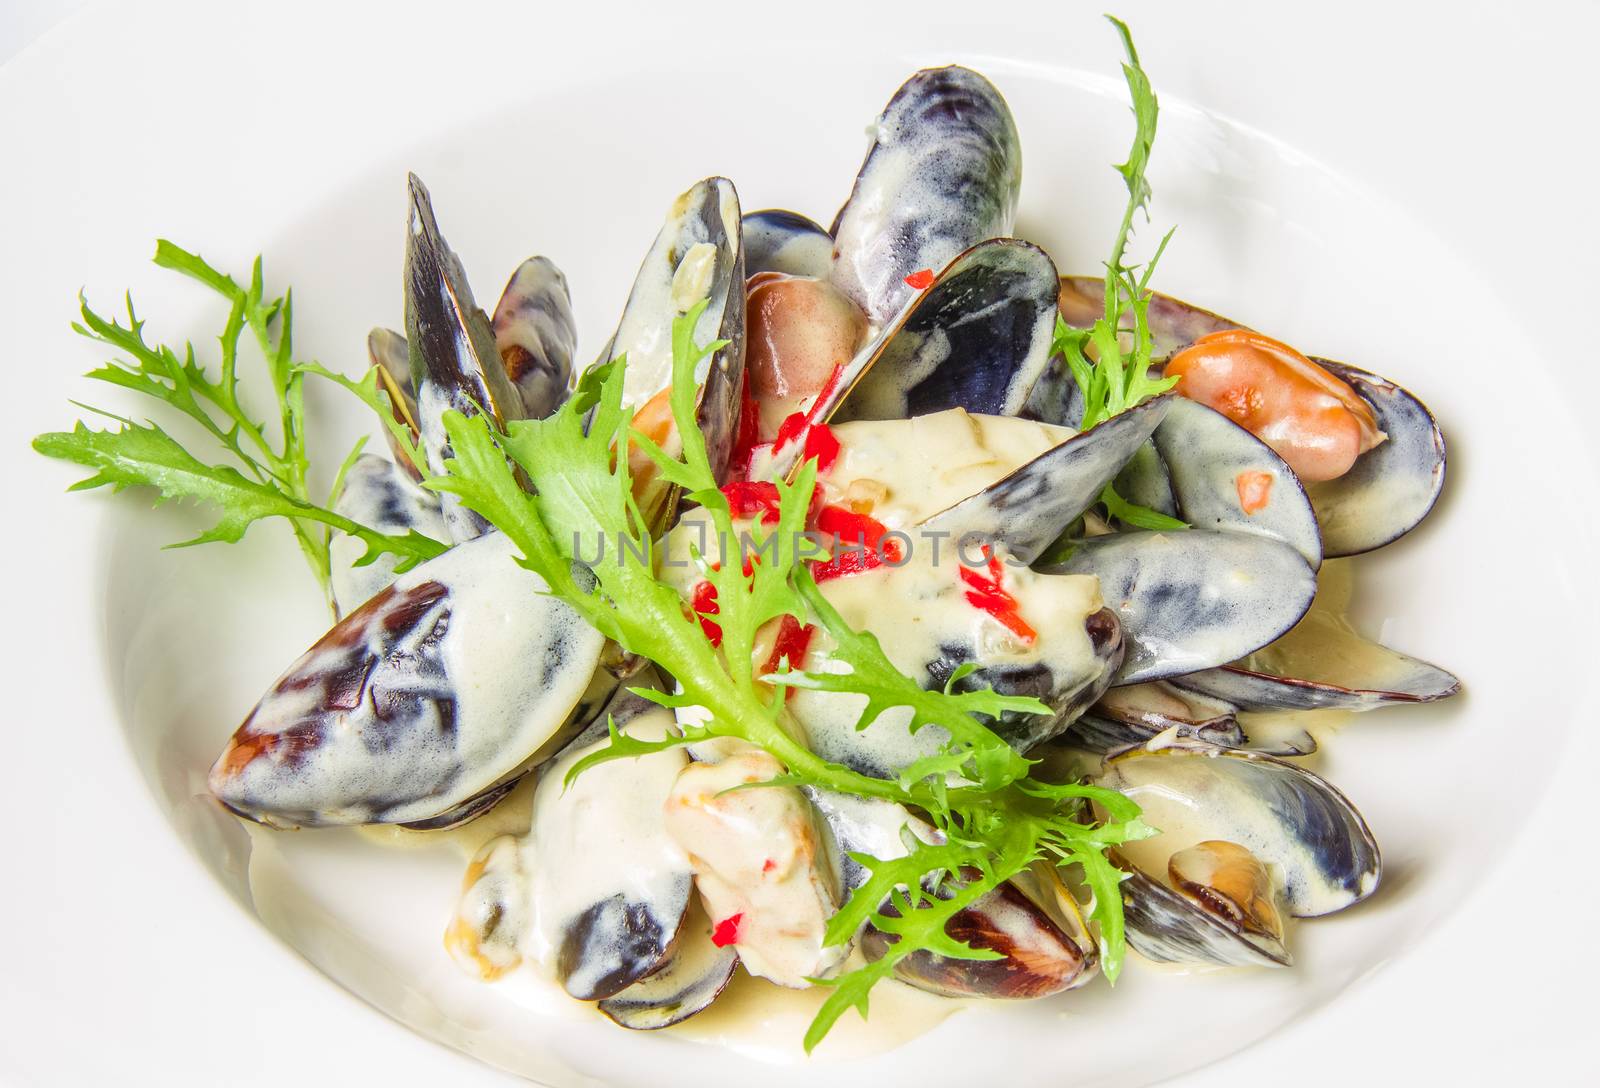 Plate of mussels in sauce with fresh herbs. Restaurant shot. by master1305